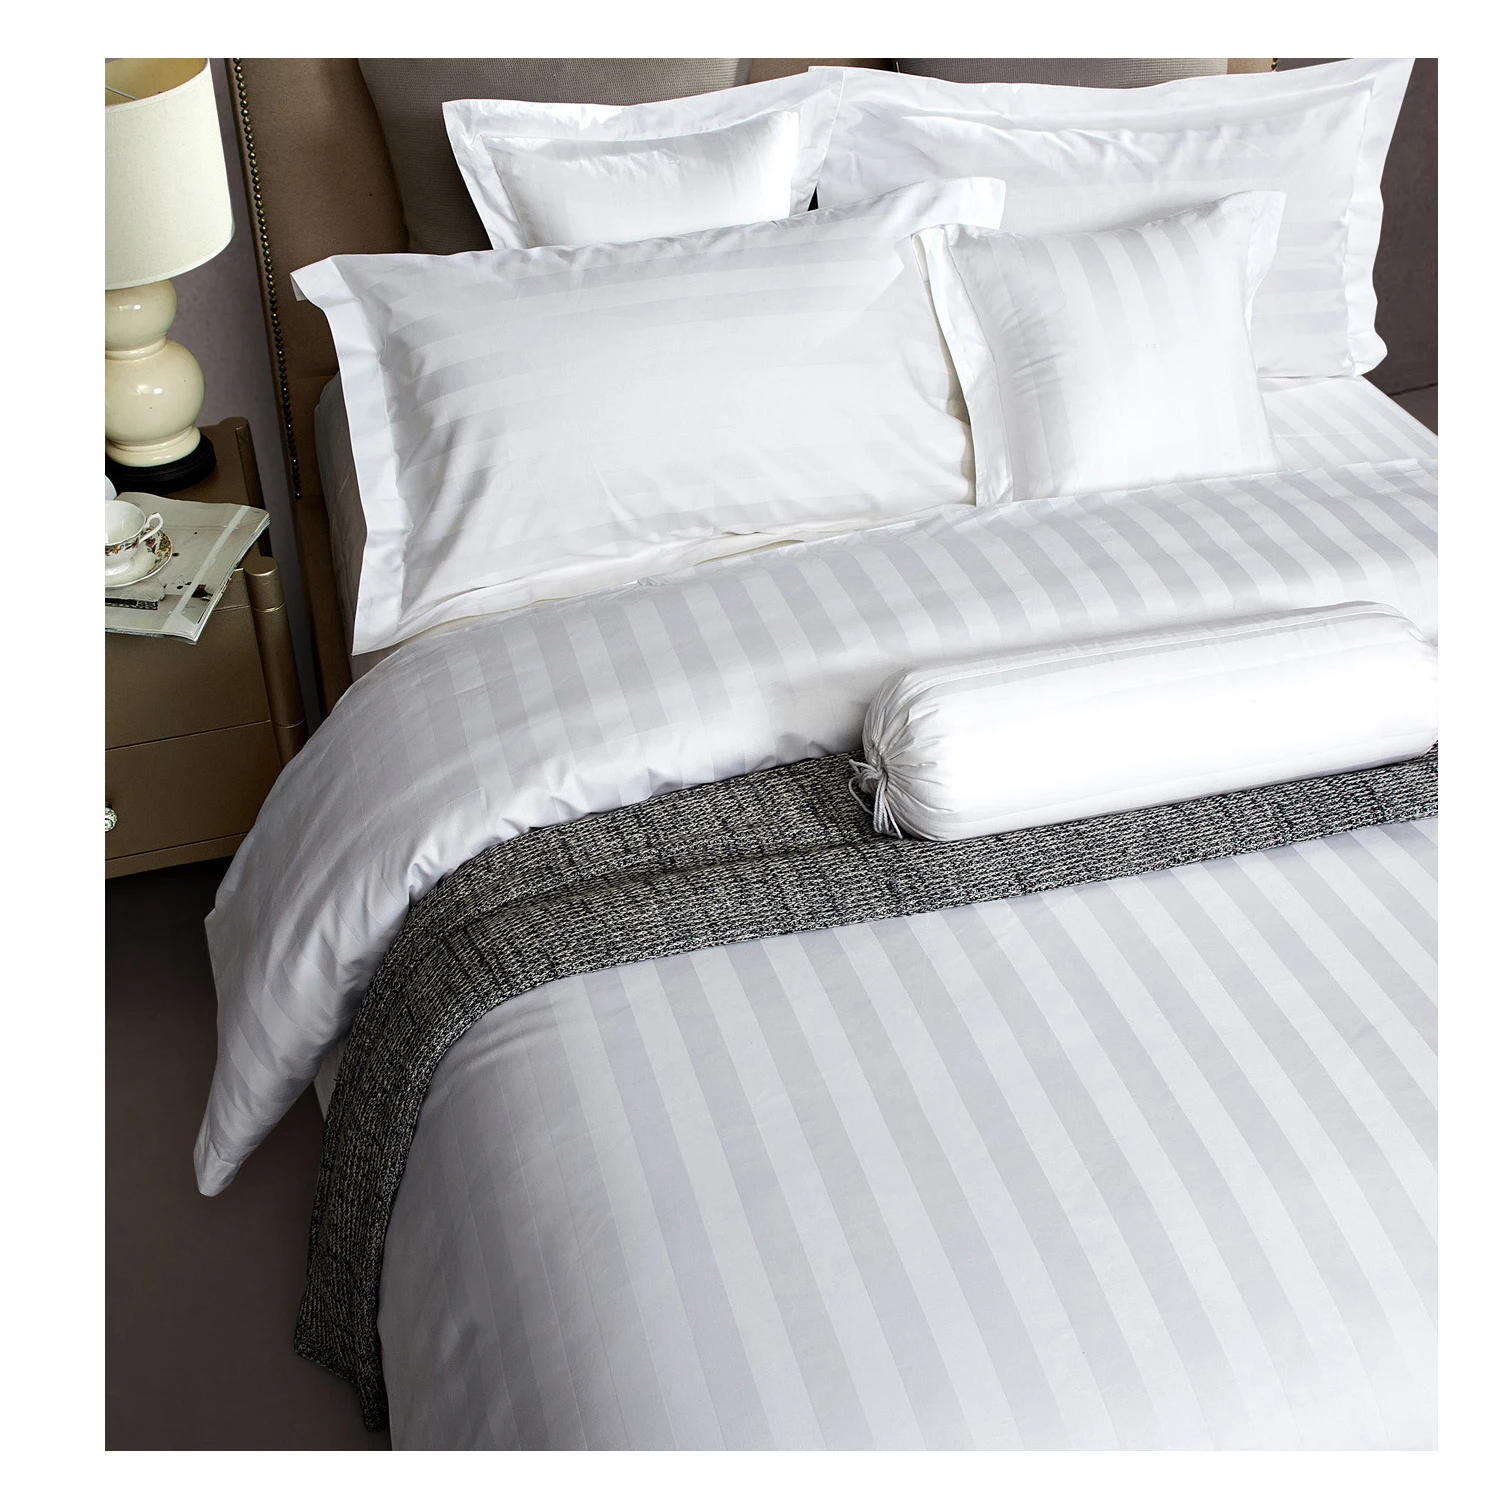 King size White Cotton fabric hotel linen 300 thread count cotton bedsheet bedsheet with comforter for hotel